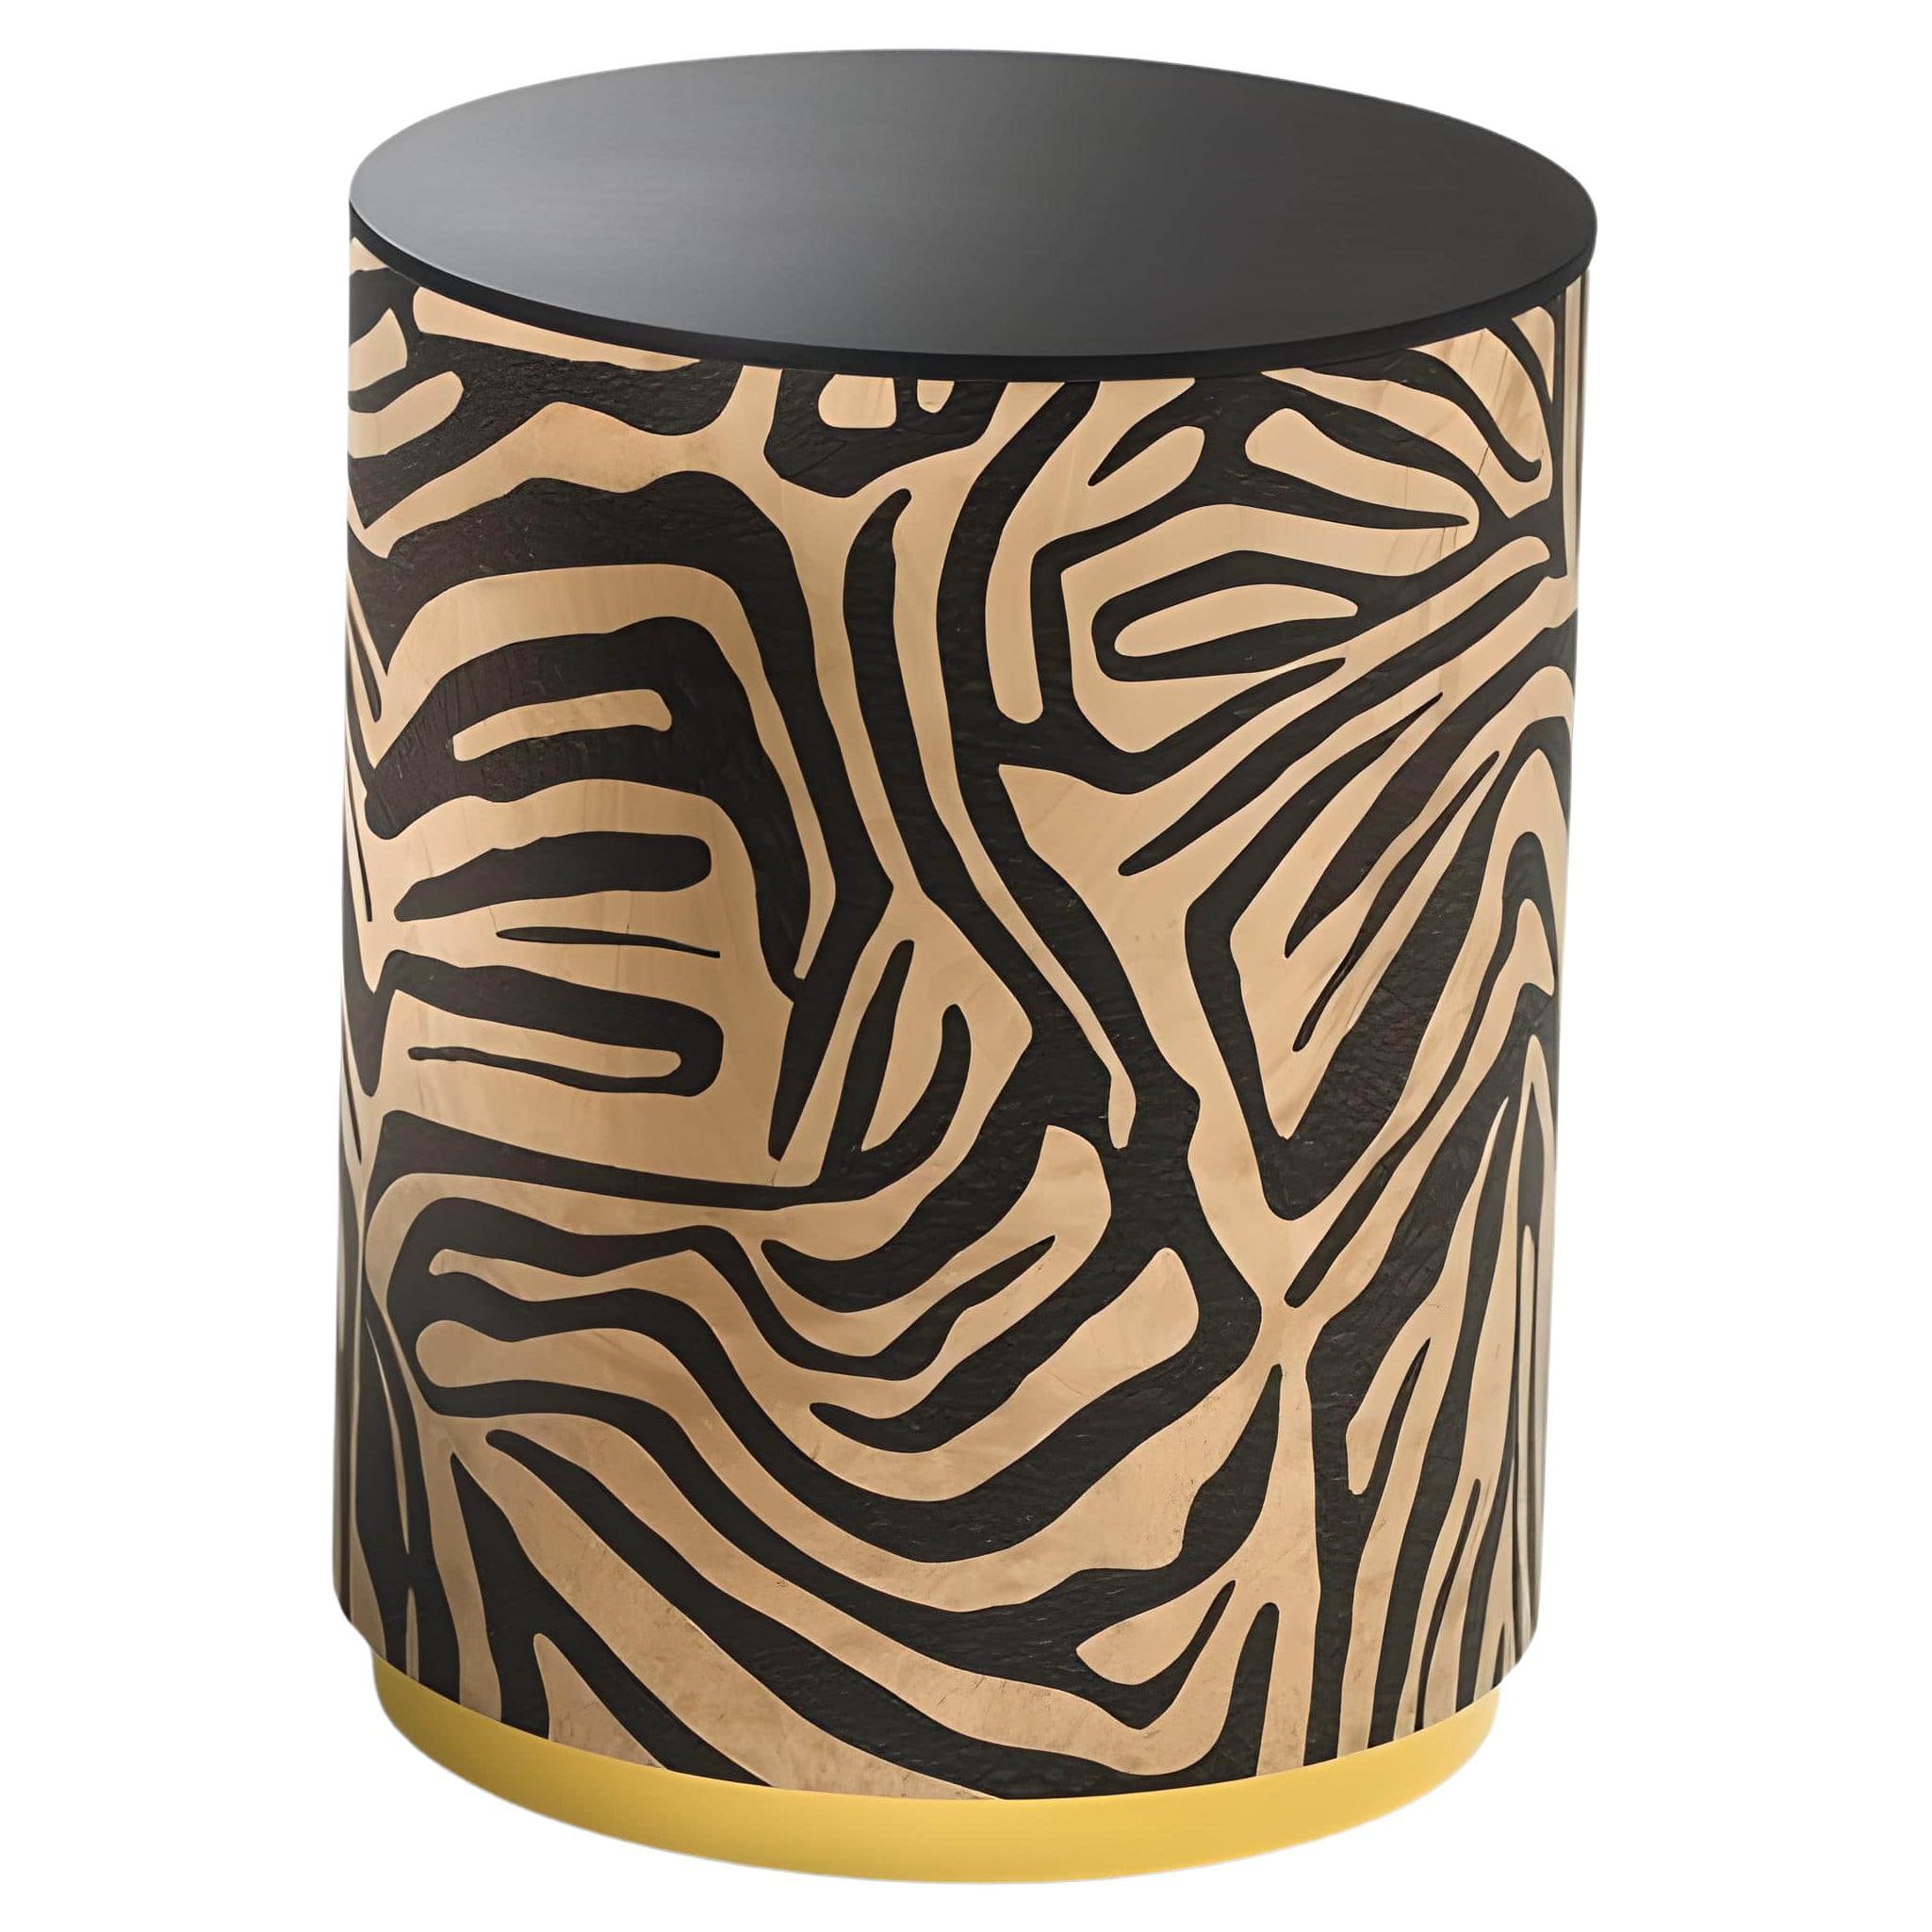 Triboo Zebra B Stool in American Walnut and Lacquered top For Sale